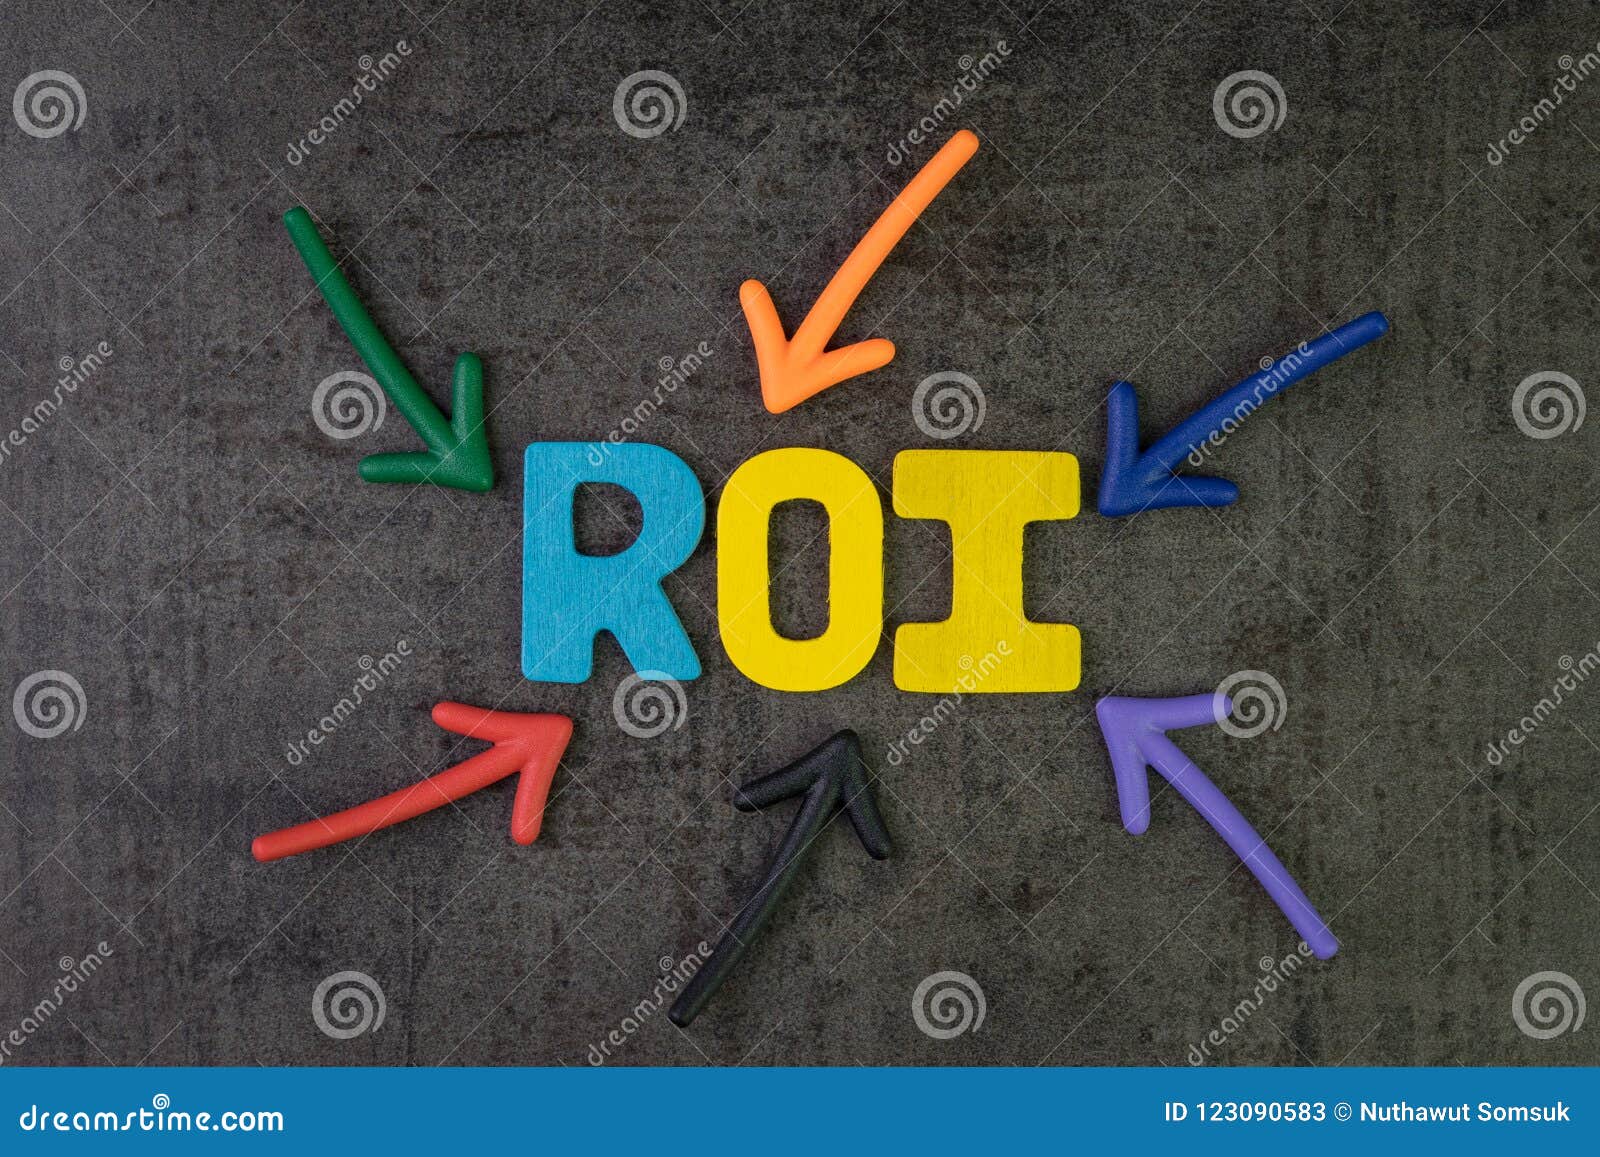 roi return on investment, performance measure of business